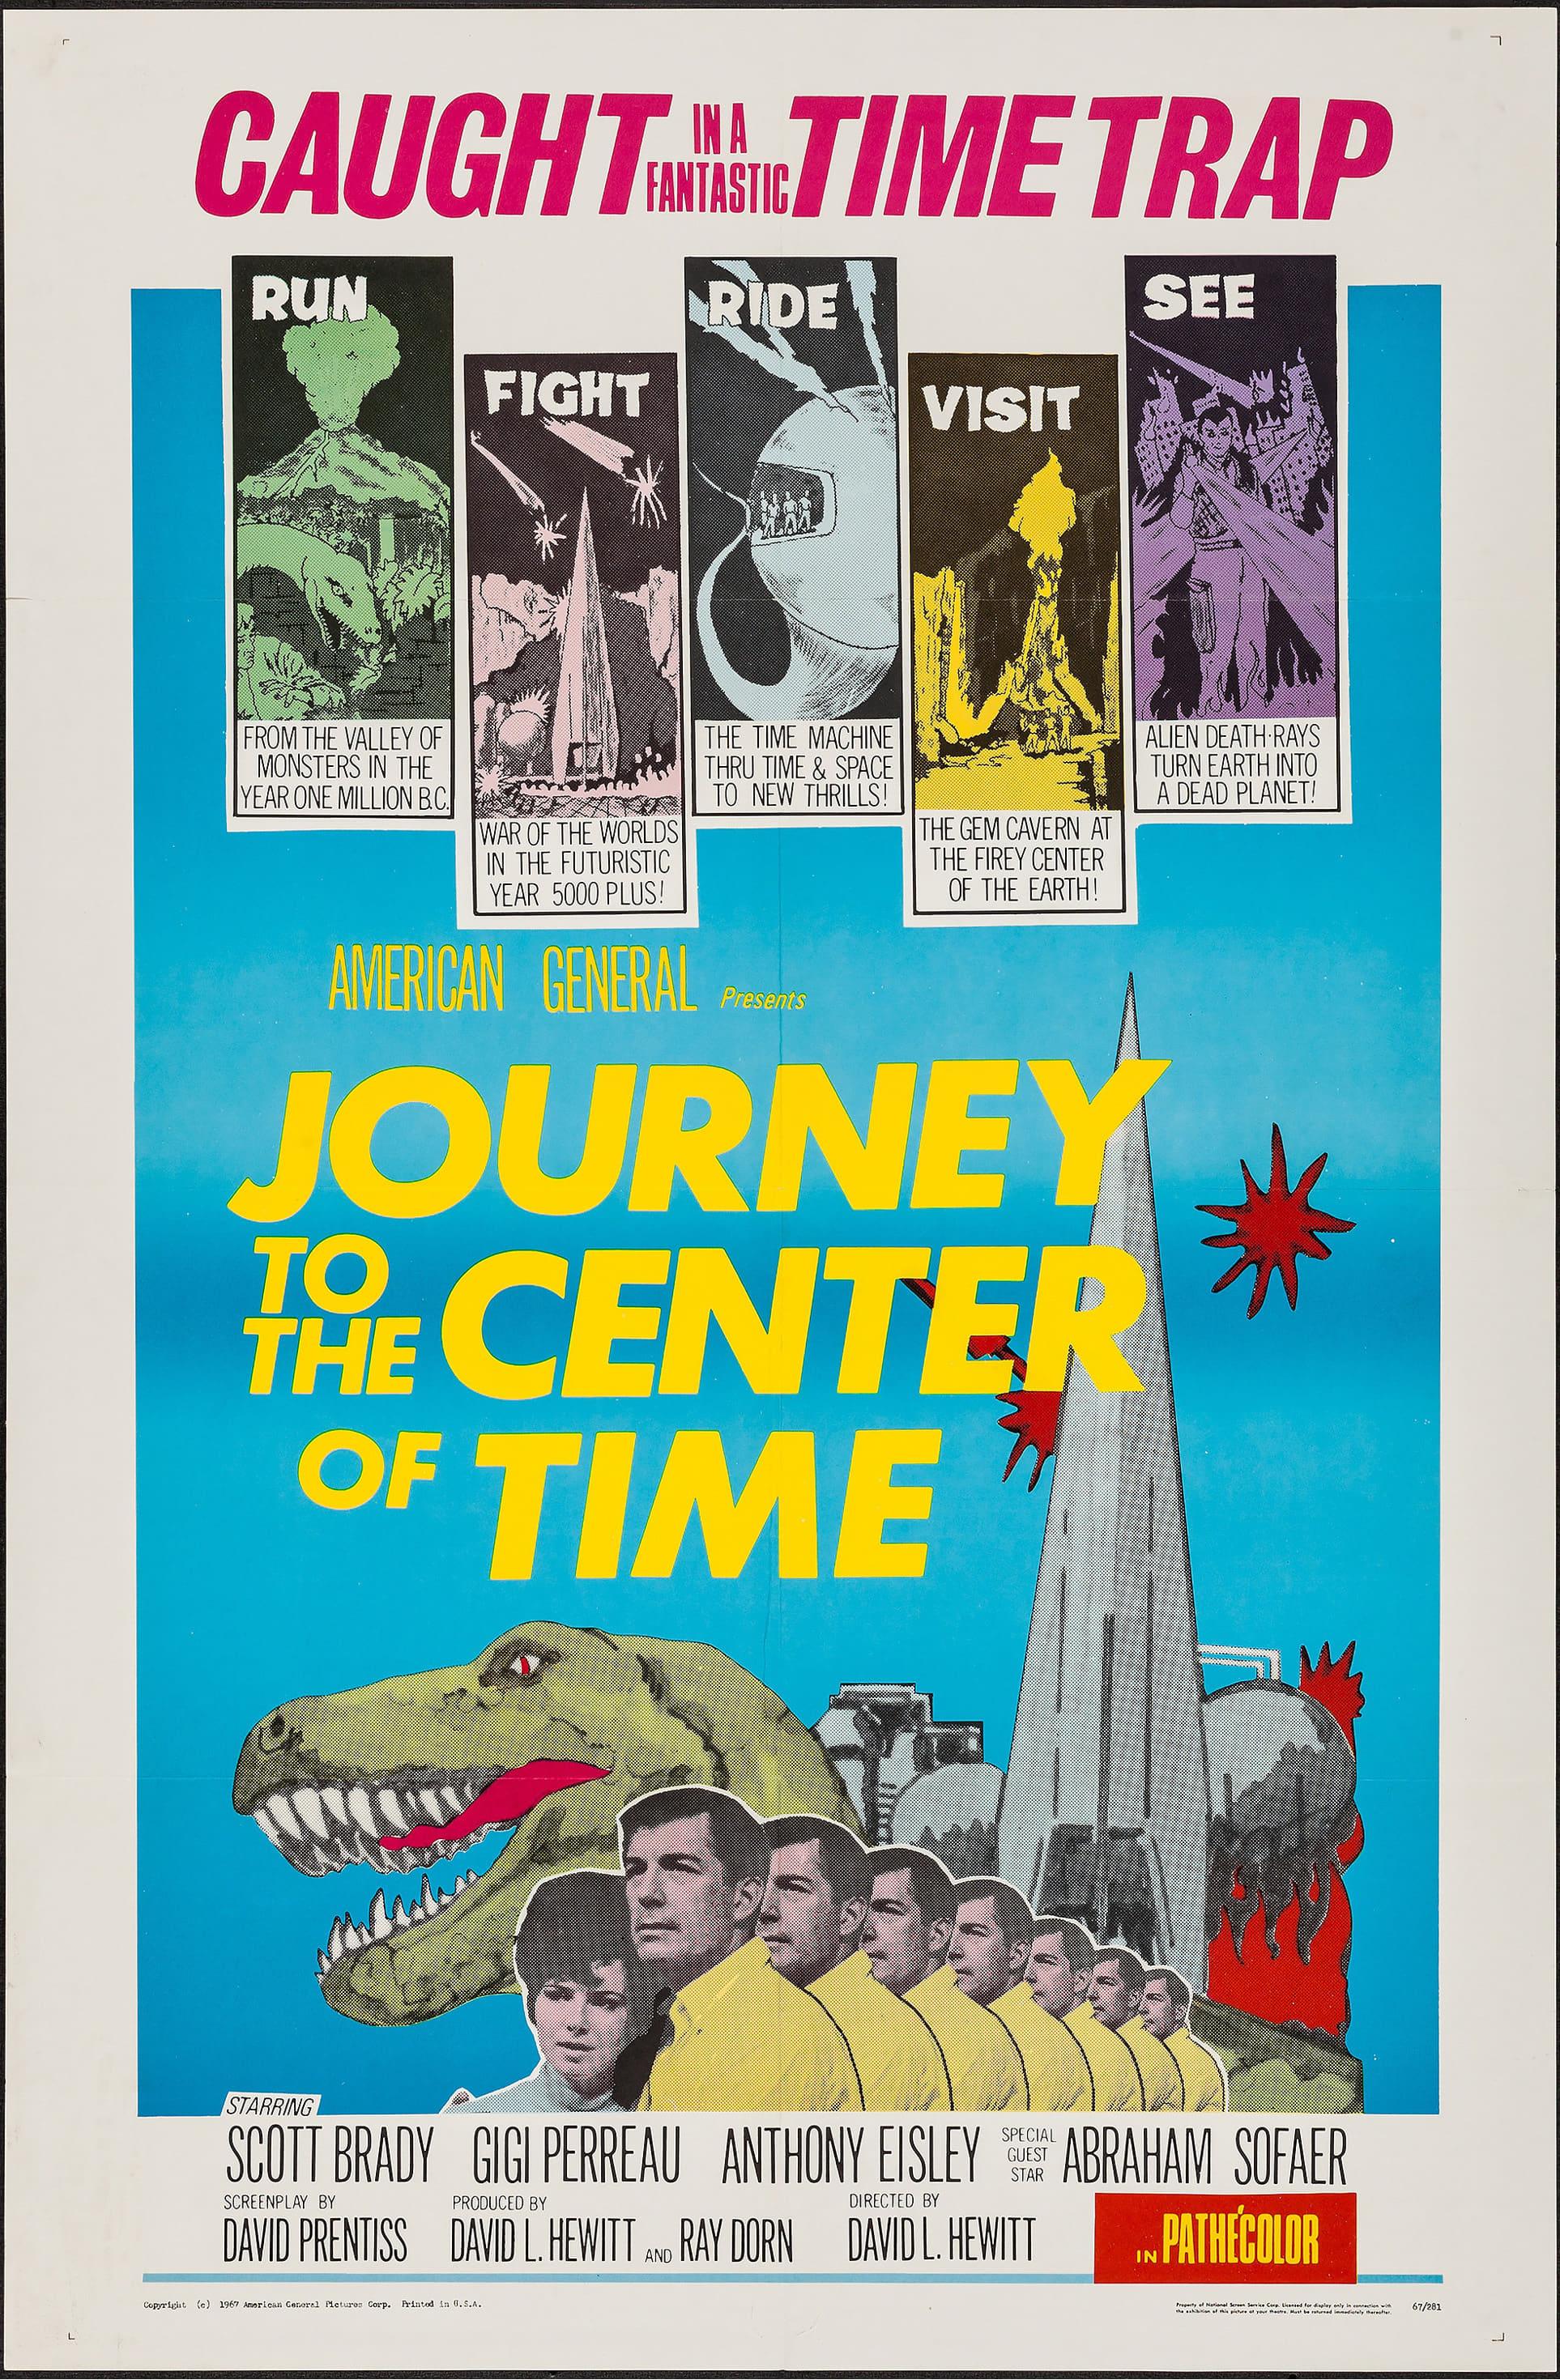 Journey to the Center of Time poster